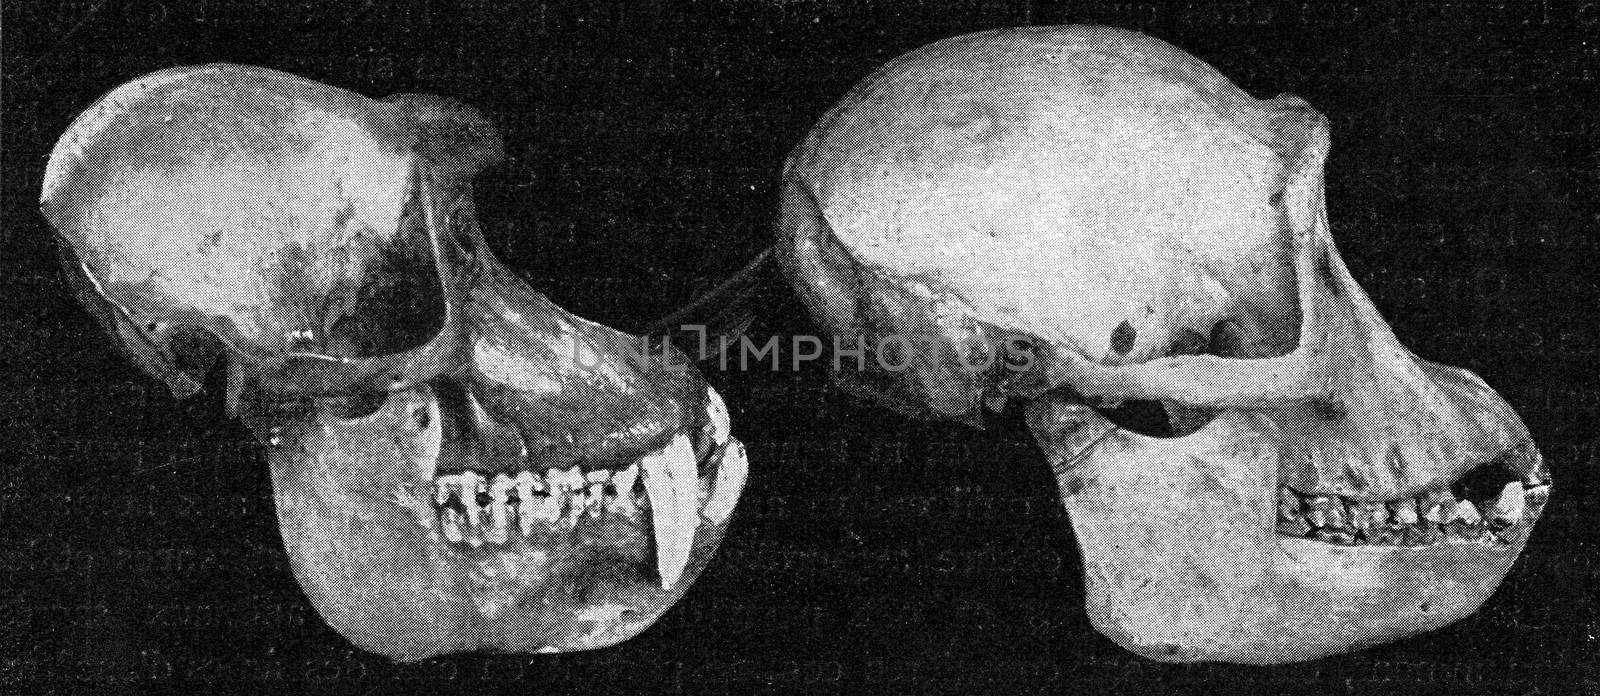 Skulls of papion and a chimpanzee, vintage engraved illustration. From the Universe and Humanity, 1910.
